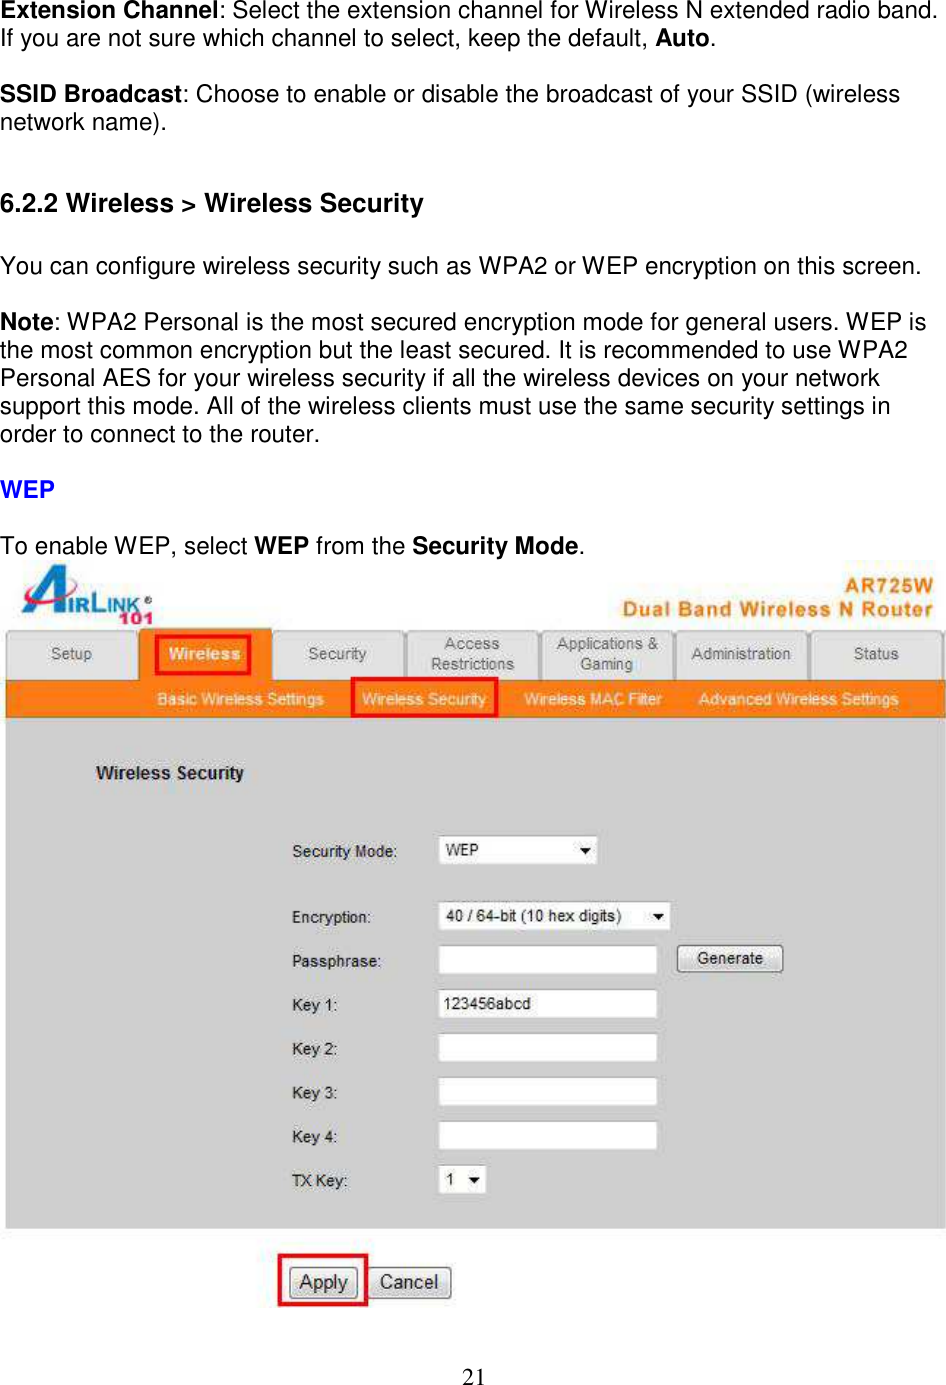 21  Extension Channel: Select the extension channel for Wireless N extended radio band. If you are not sure which channel to select, keep the default, Auto.  SSID Broadcast: Choose to enable or disable the broadcast of your SSID (wireless network name).  6.2.2 Wireless &gt; Wireless Security  You can configure wireless security such as WPA2 or WEP encryption on this screen.  Note: WPA2 Personal is the most secured encryption mode for general users. WEP is the most common encryption but the least secured. It is recommended to use WPA2 Personal AES for your wireless security if all the wireless devices on your network support this mode. All of the wireless clients must use the same security settings in order to connect to the router.  WEP  To enable WEP, select WEP from the Security Mode.   